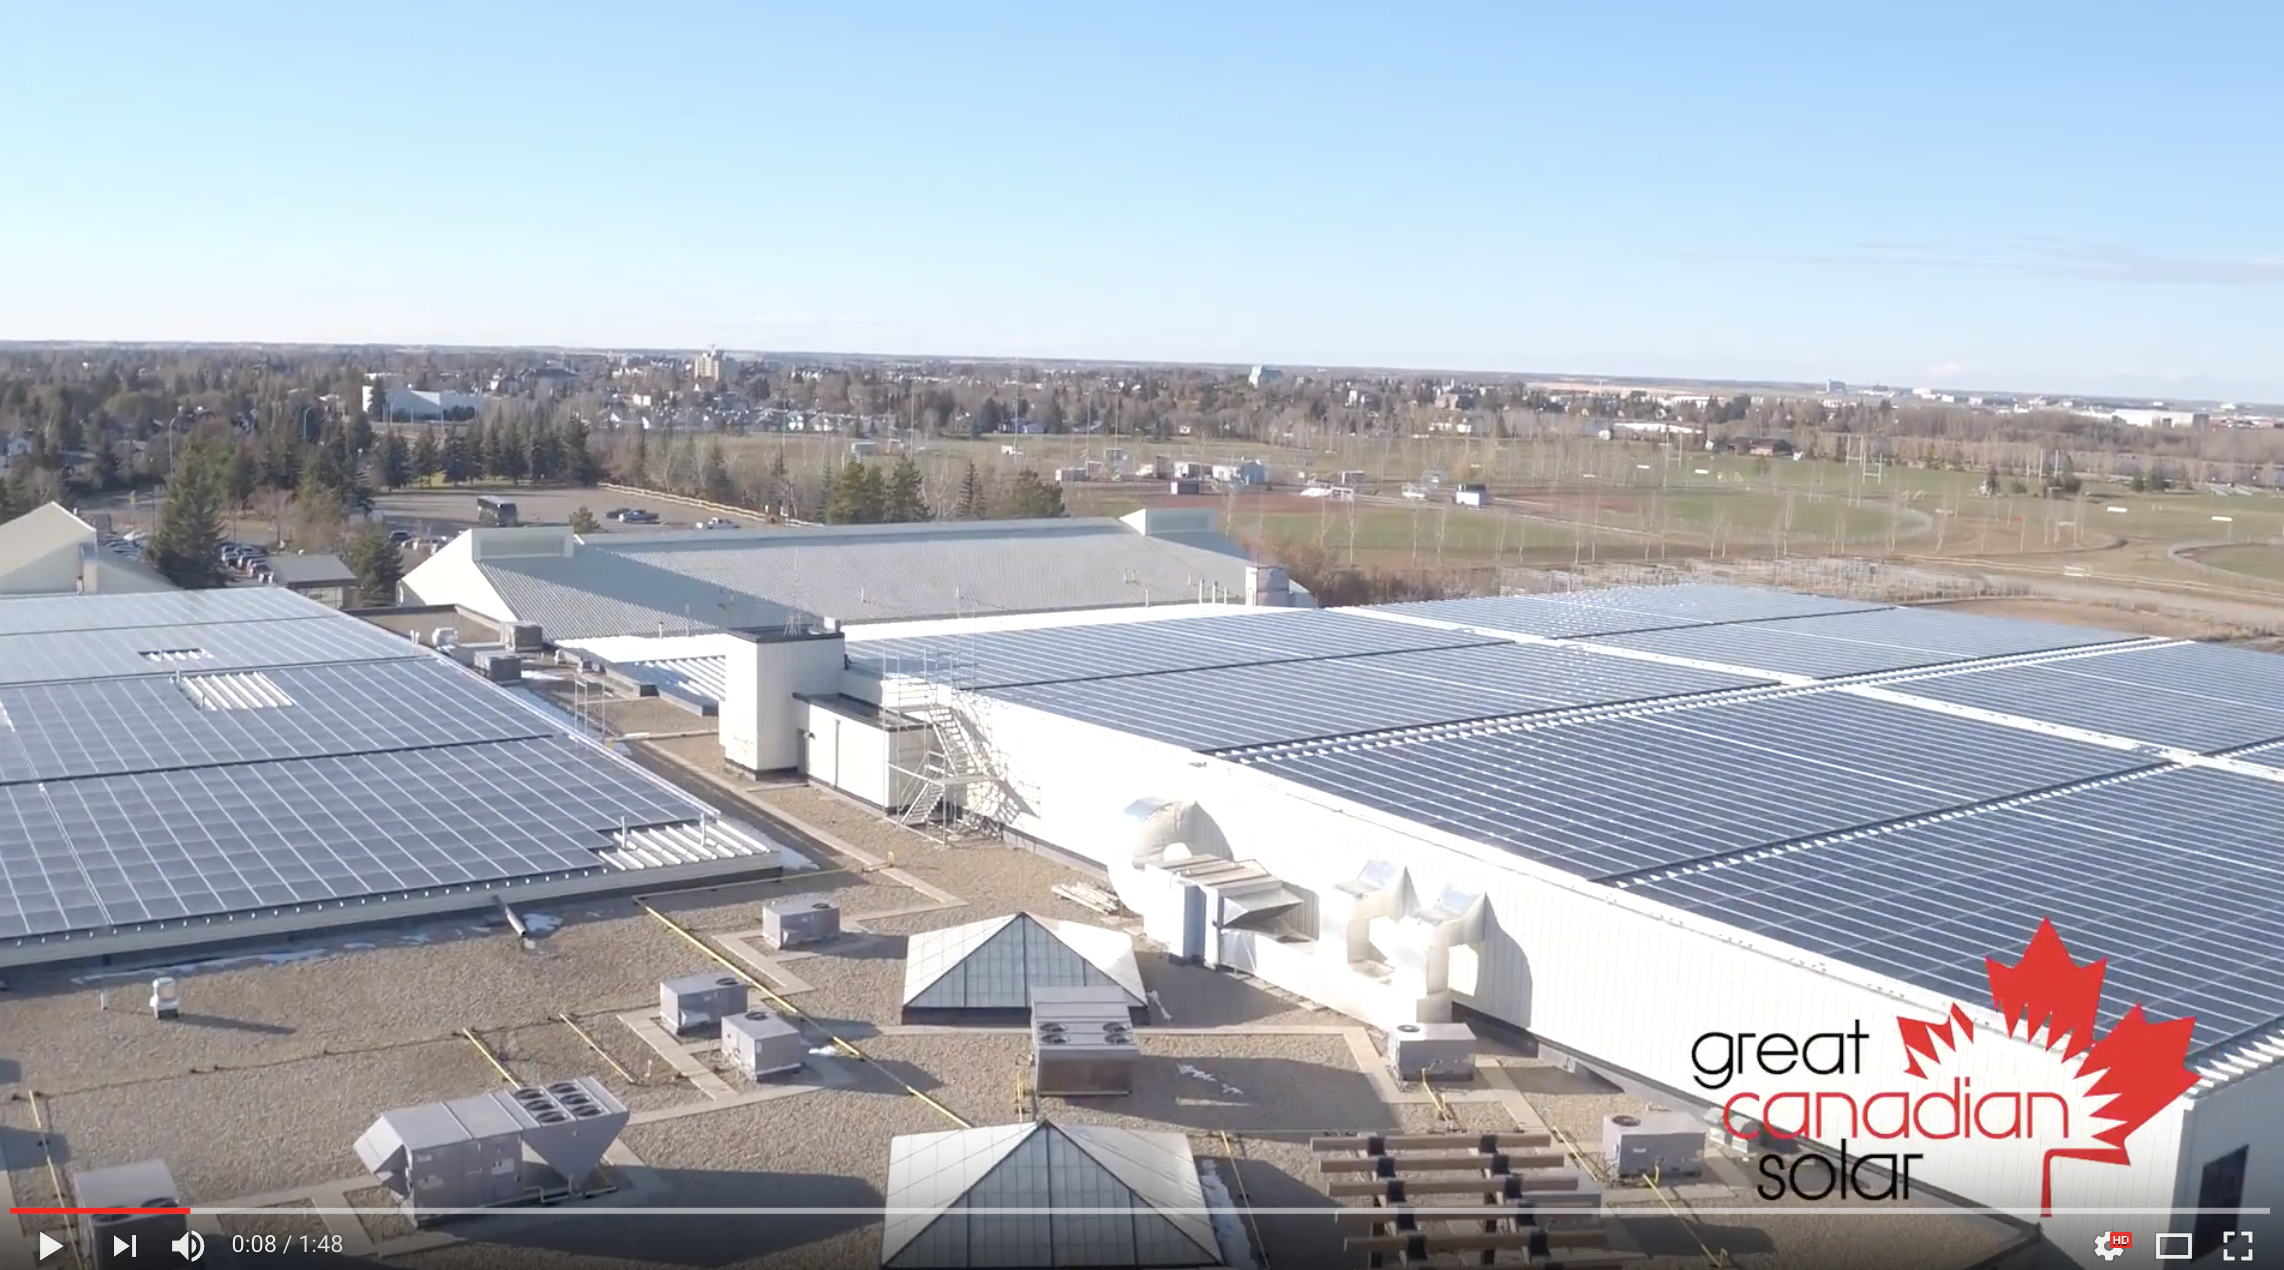 Great Canadian Solar Brand Video